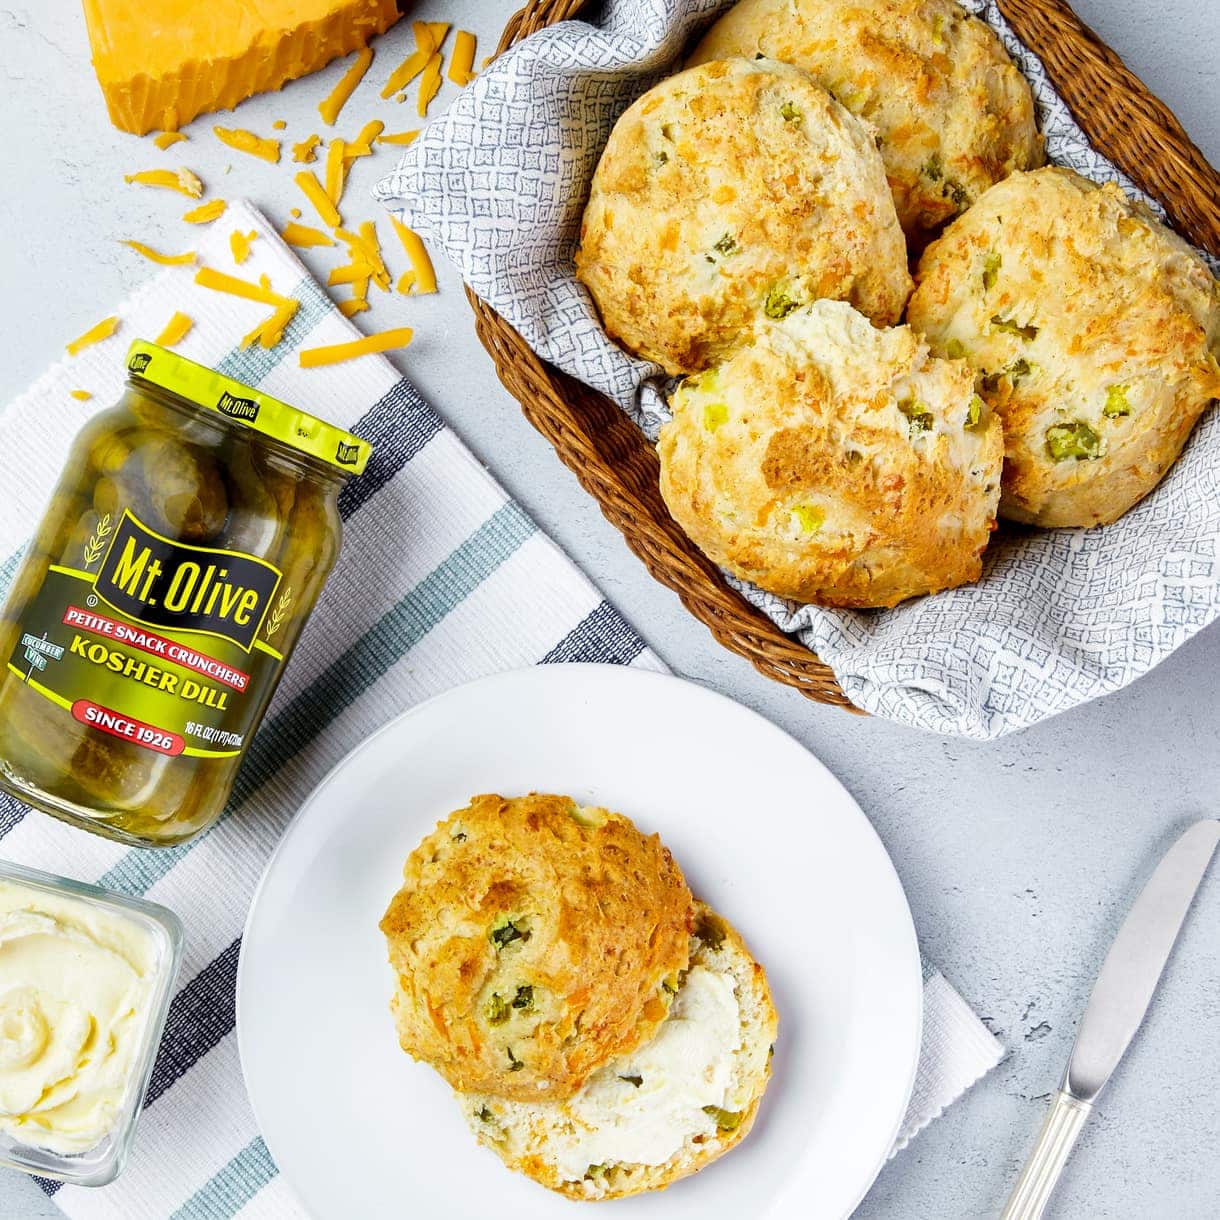 Biscuits with cheddar cheese and jar of kosher dill pickles. side of butter